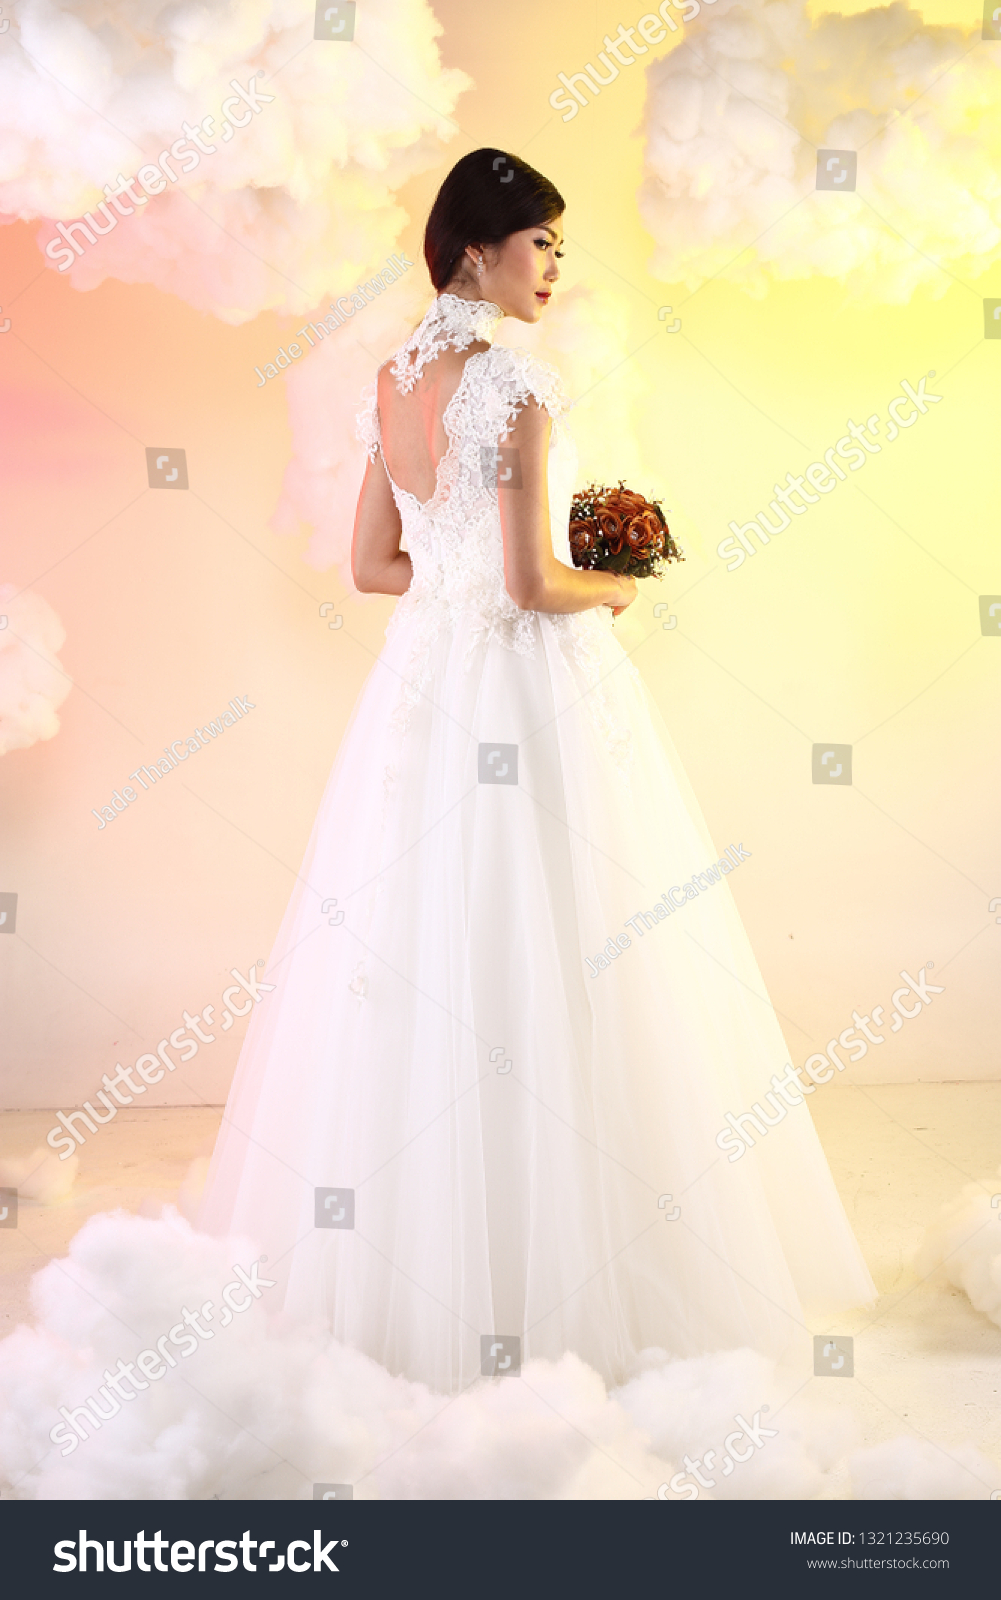 https://image.shutterstock.com/z/stock-photo-lovely-asian-beautiful-woman-bride-in-white-wedding-gown-dress-with-lace-veil-black-hair-studio-1321235690.jpg